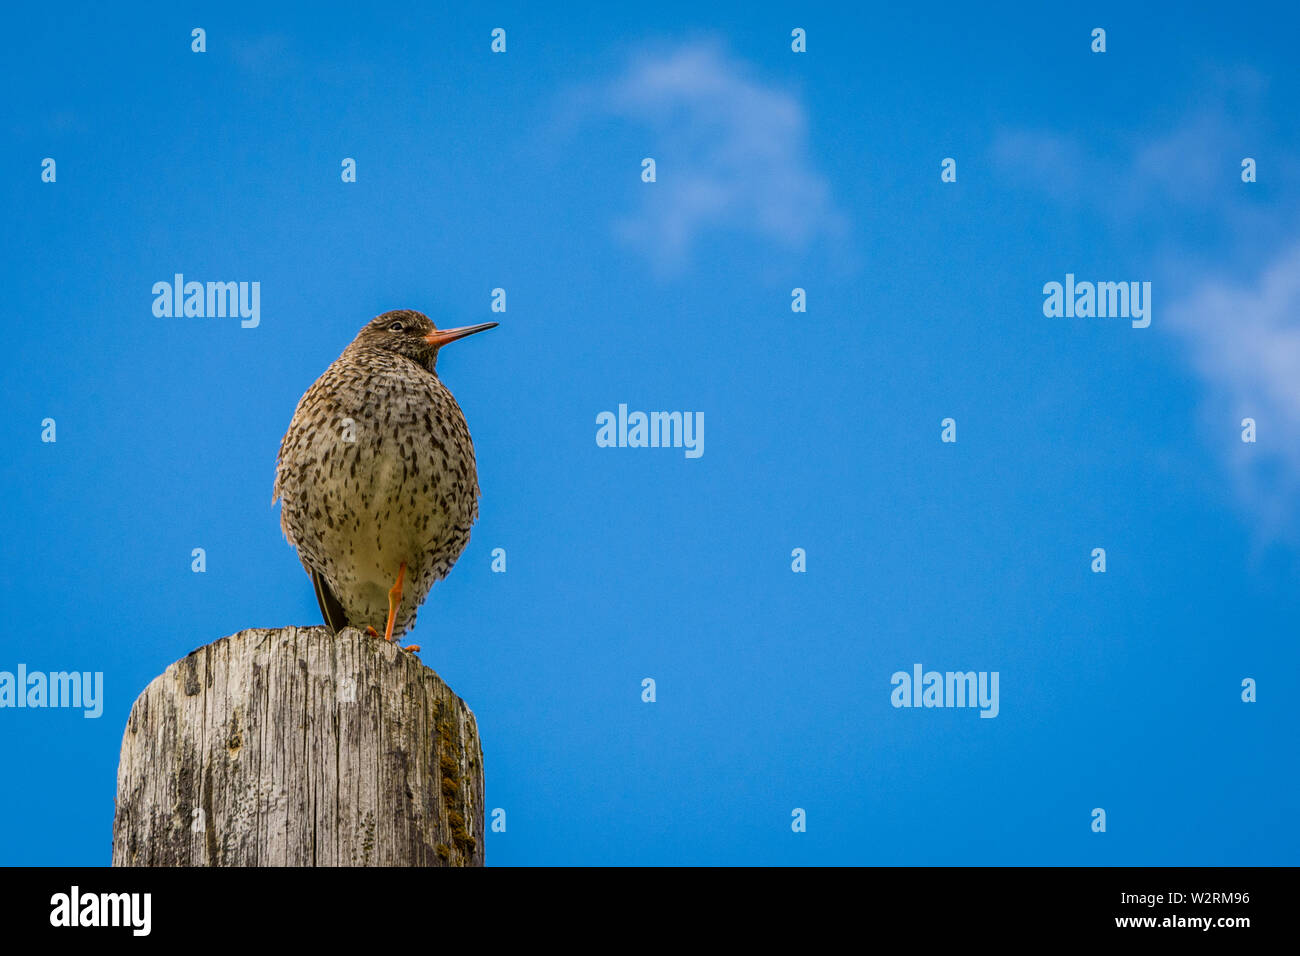 Common Redshank ((Tringa totanus) sitting on a pole with one foot, looking right, blue sky and clouds Stock Photo